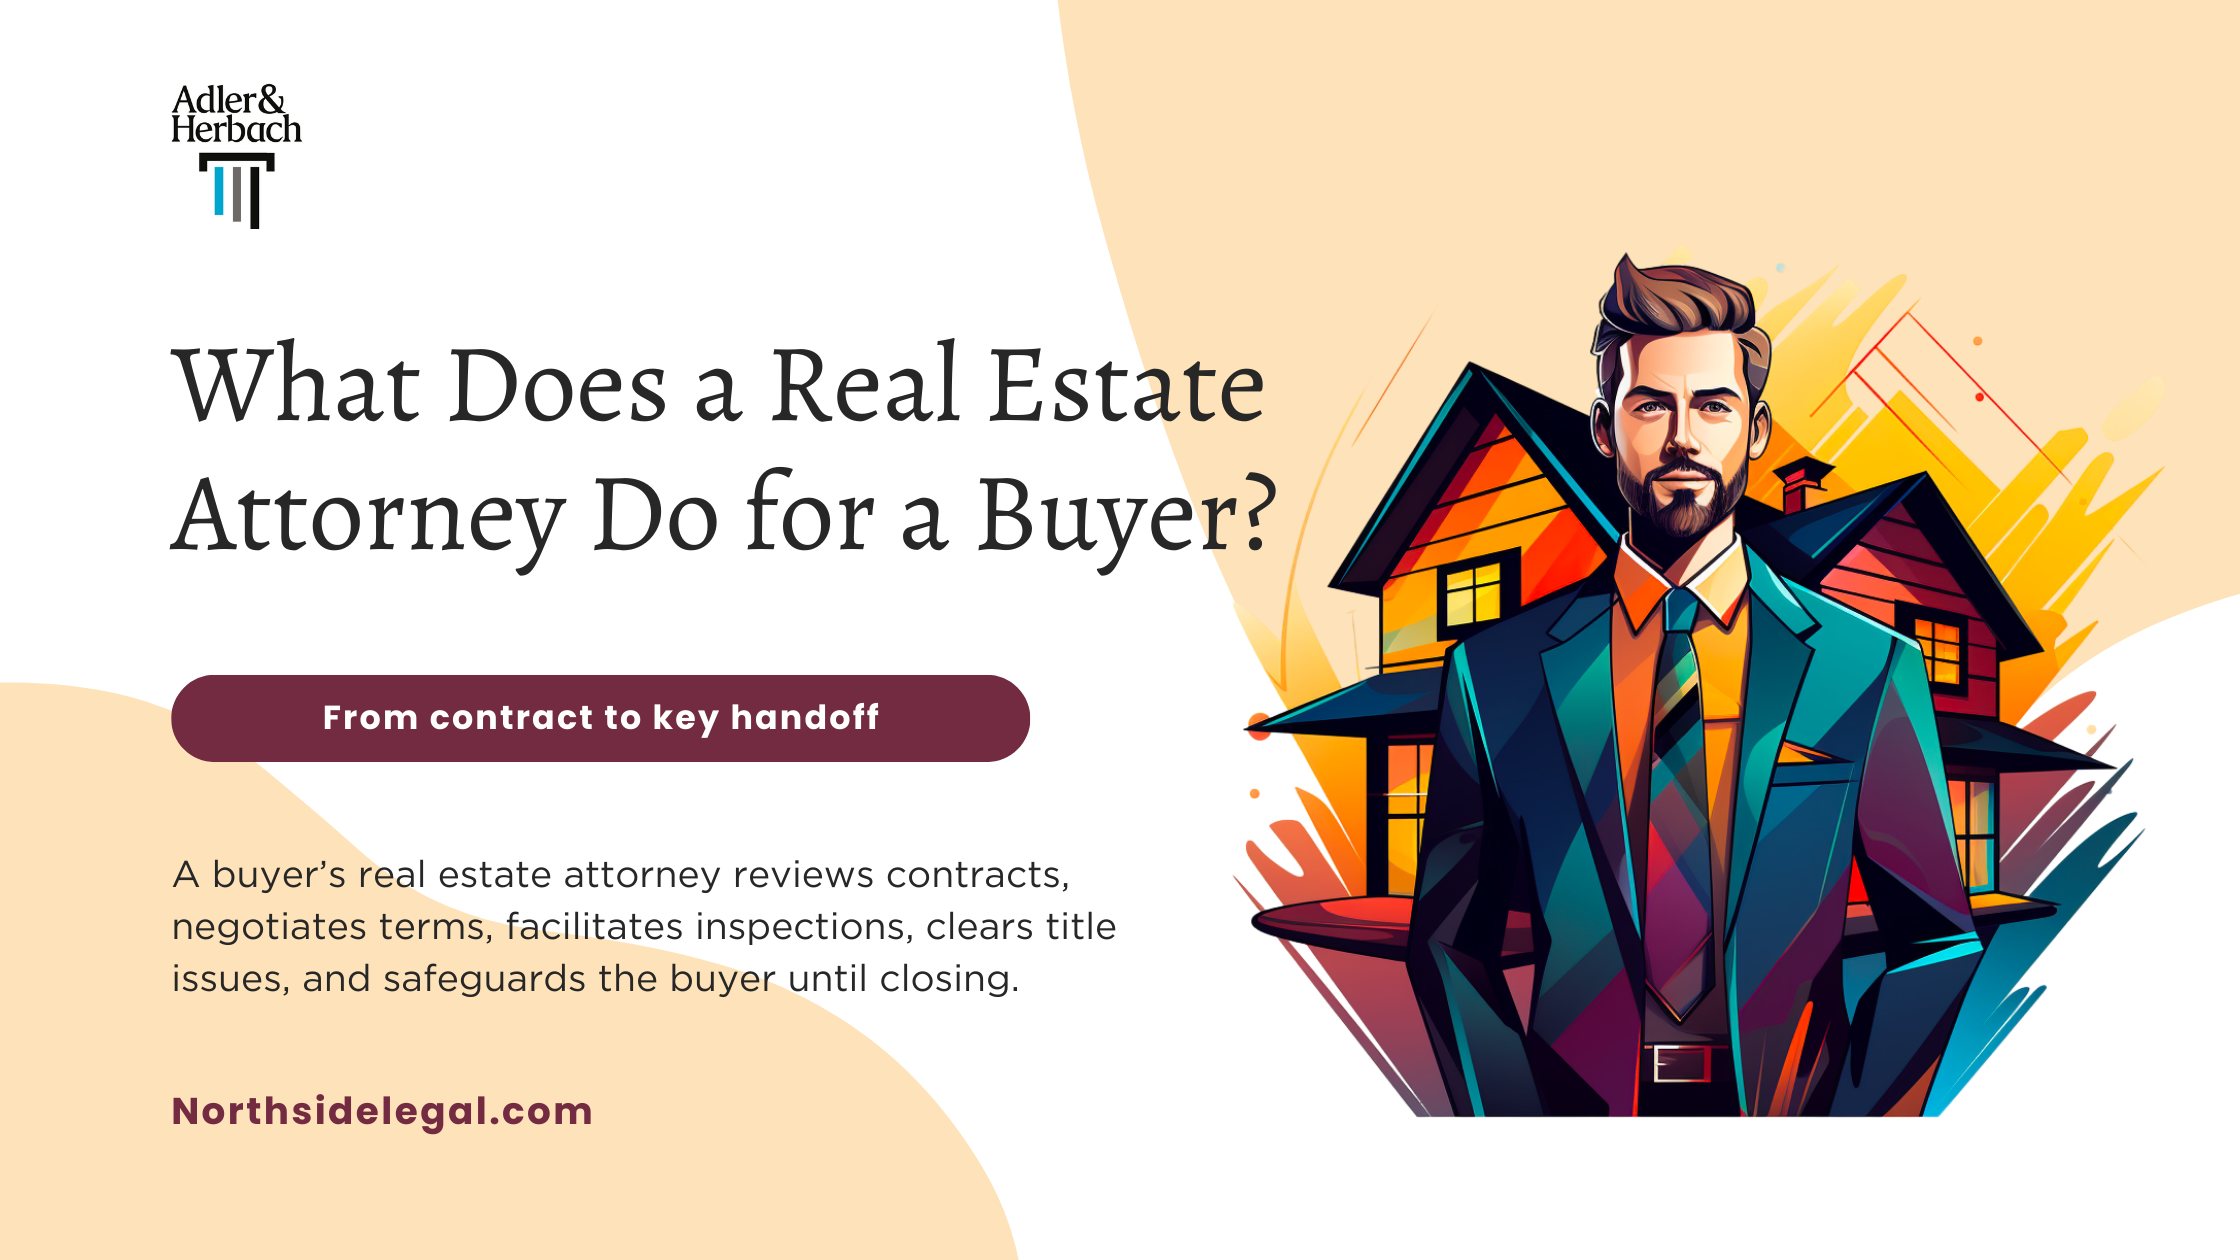 What Does a Real Estate Attorney Do for a Buyer in Illinois?